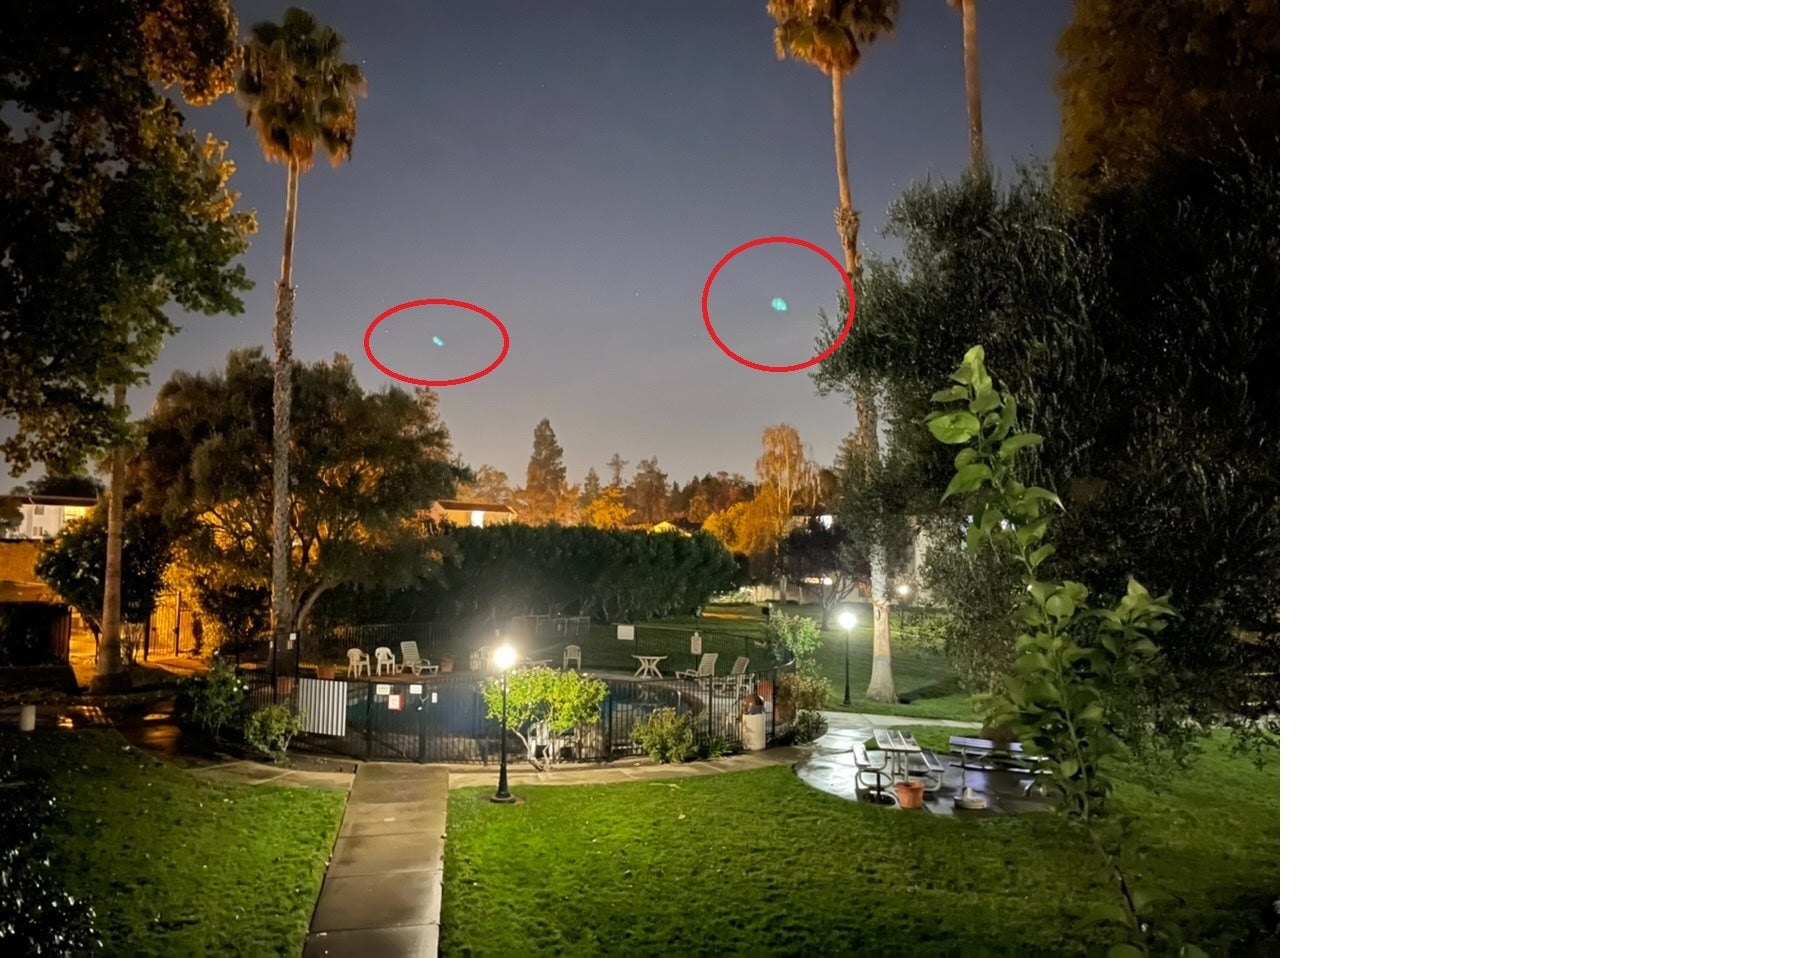 Green dots appear in this photograph snapped by an iPhone 12 Pro Max - Apple has a plan to rid photos of those ugly green flares with iOS 15